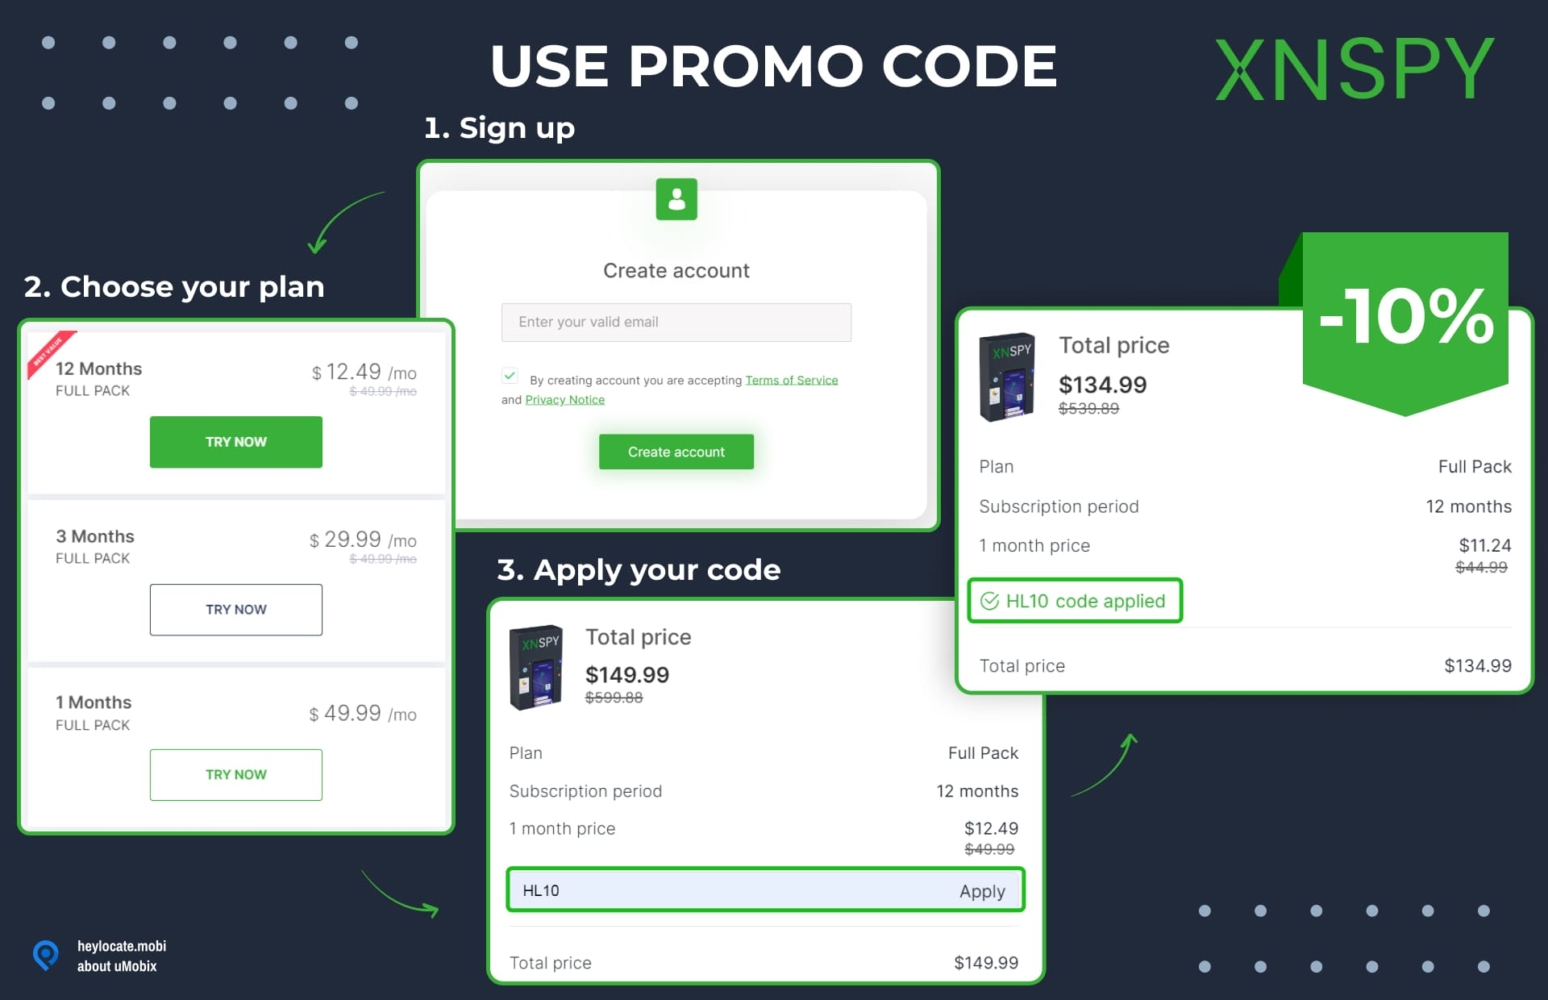 Explanatory graphic showing the step-by-step process of using heylocate promo code. Step 1: Register on the XNSPY website using your email. Step 2: Select a subscription package. Step 3: Go to the selected package and enter the promo code. Step 4: Activate the promo code and get 10% discount.